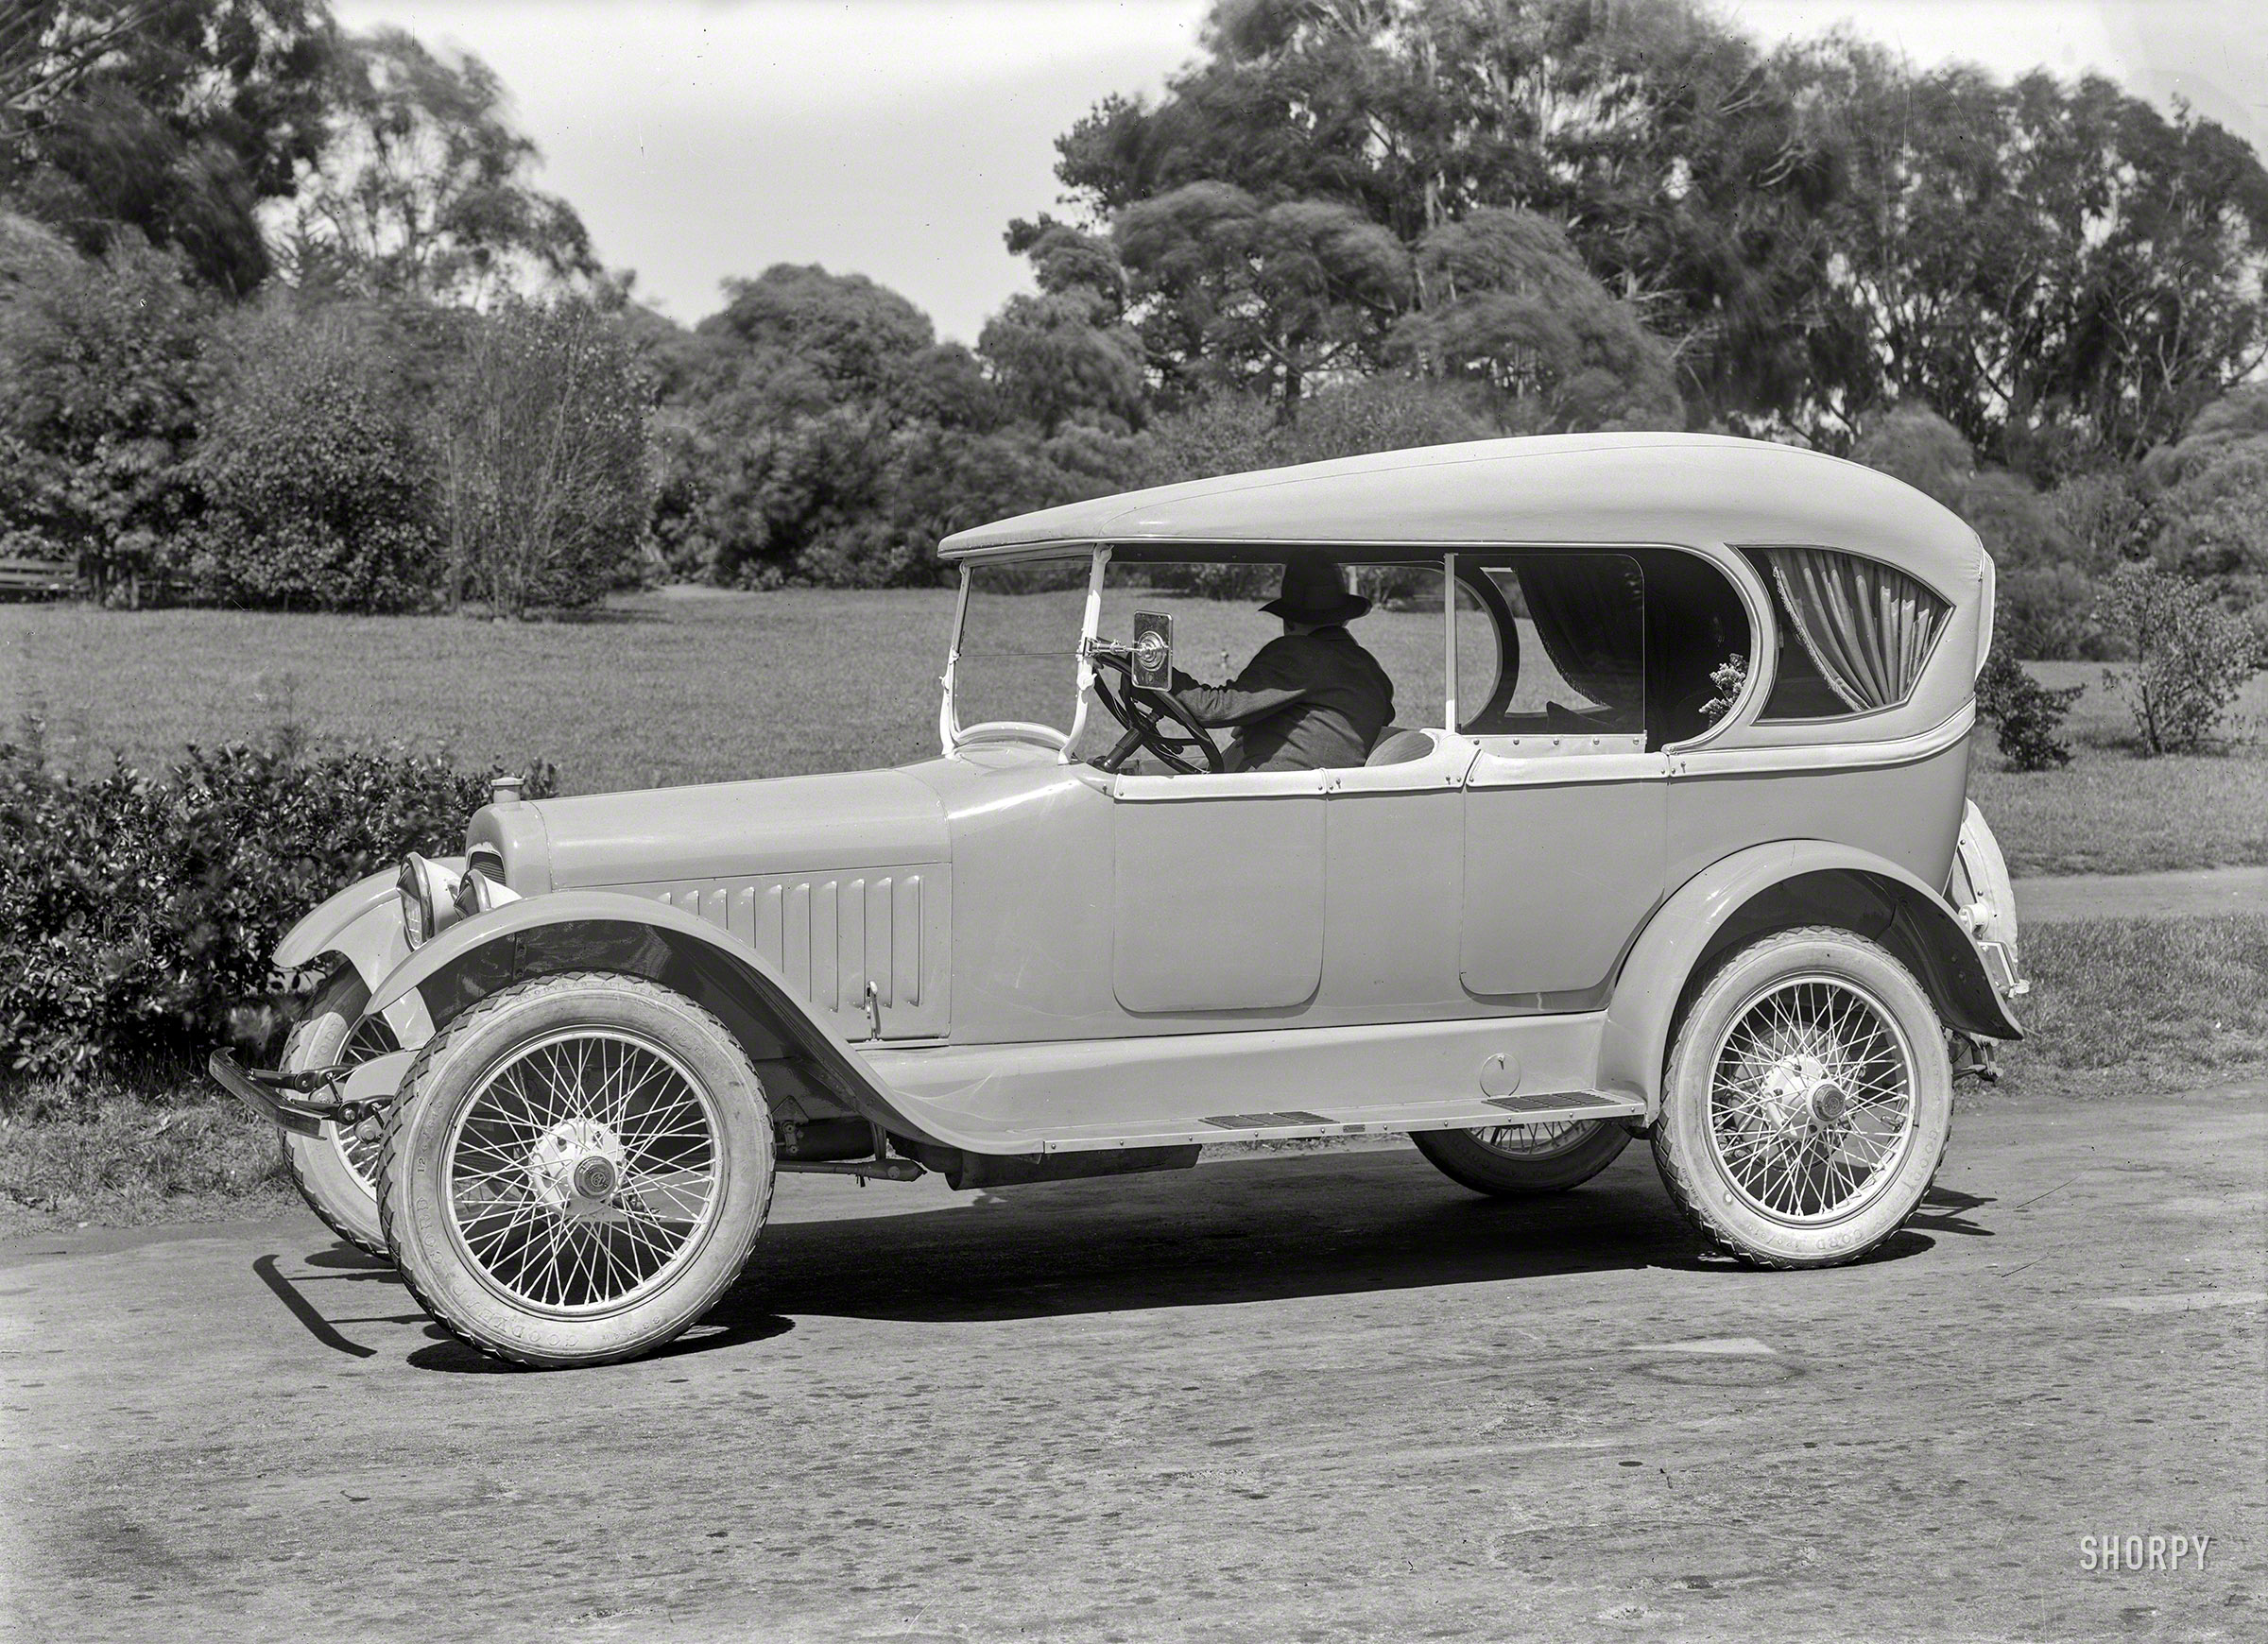 San Francisco circa 1919. "Chalmers touring car at Golden Gate Park." Fitted with a funereally swagged top, complete with flowers. Latest addition to the Shorpy Mortuary of Marmoreal Motorcars. Photo by Christopher Helin. View full size.